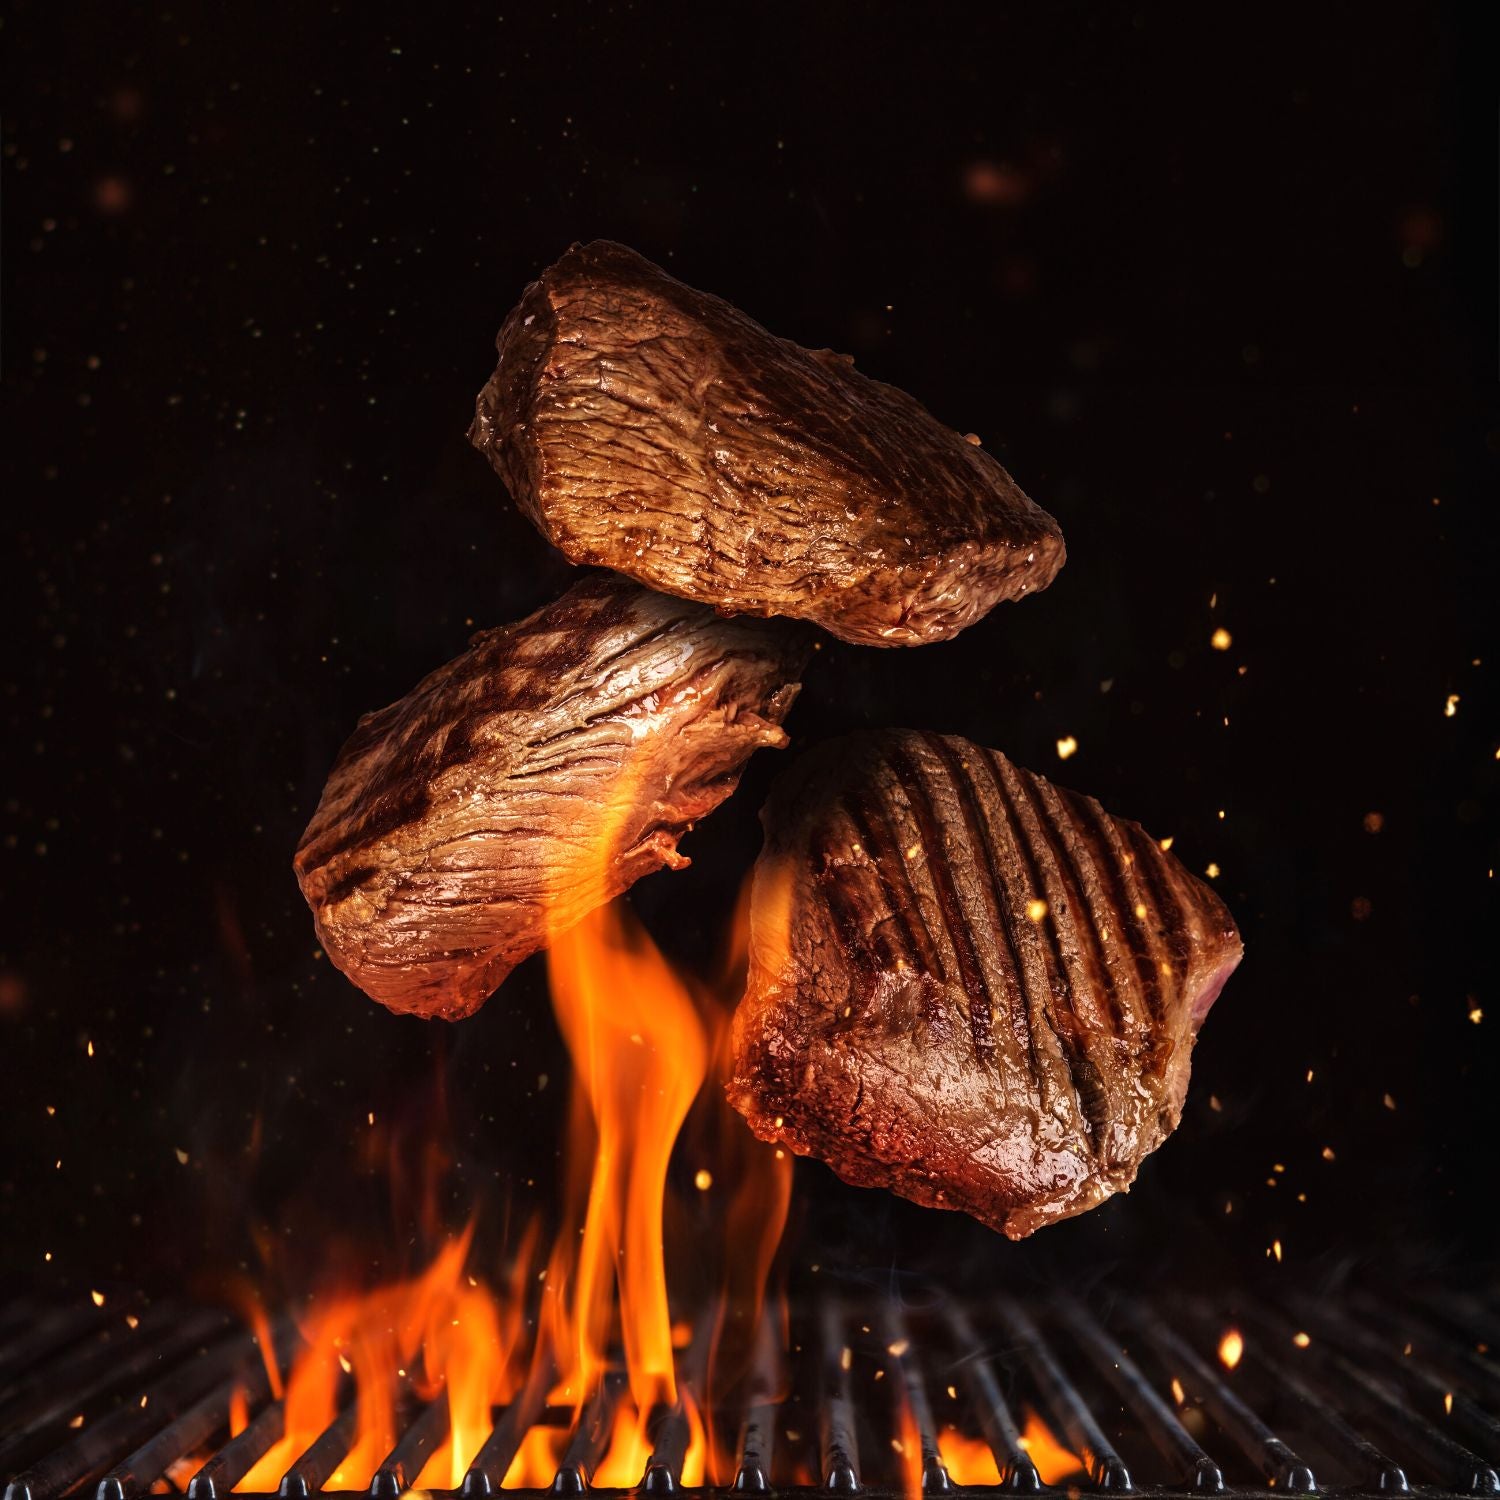 A close-up of a juicy, grilled steak with grill marks